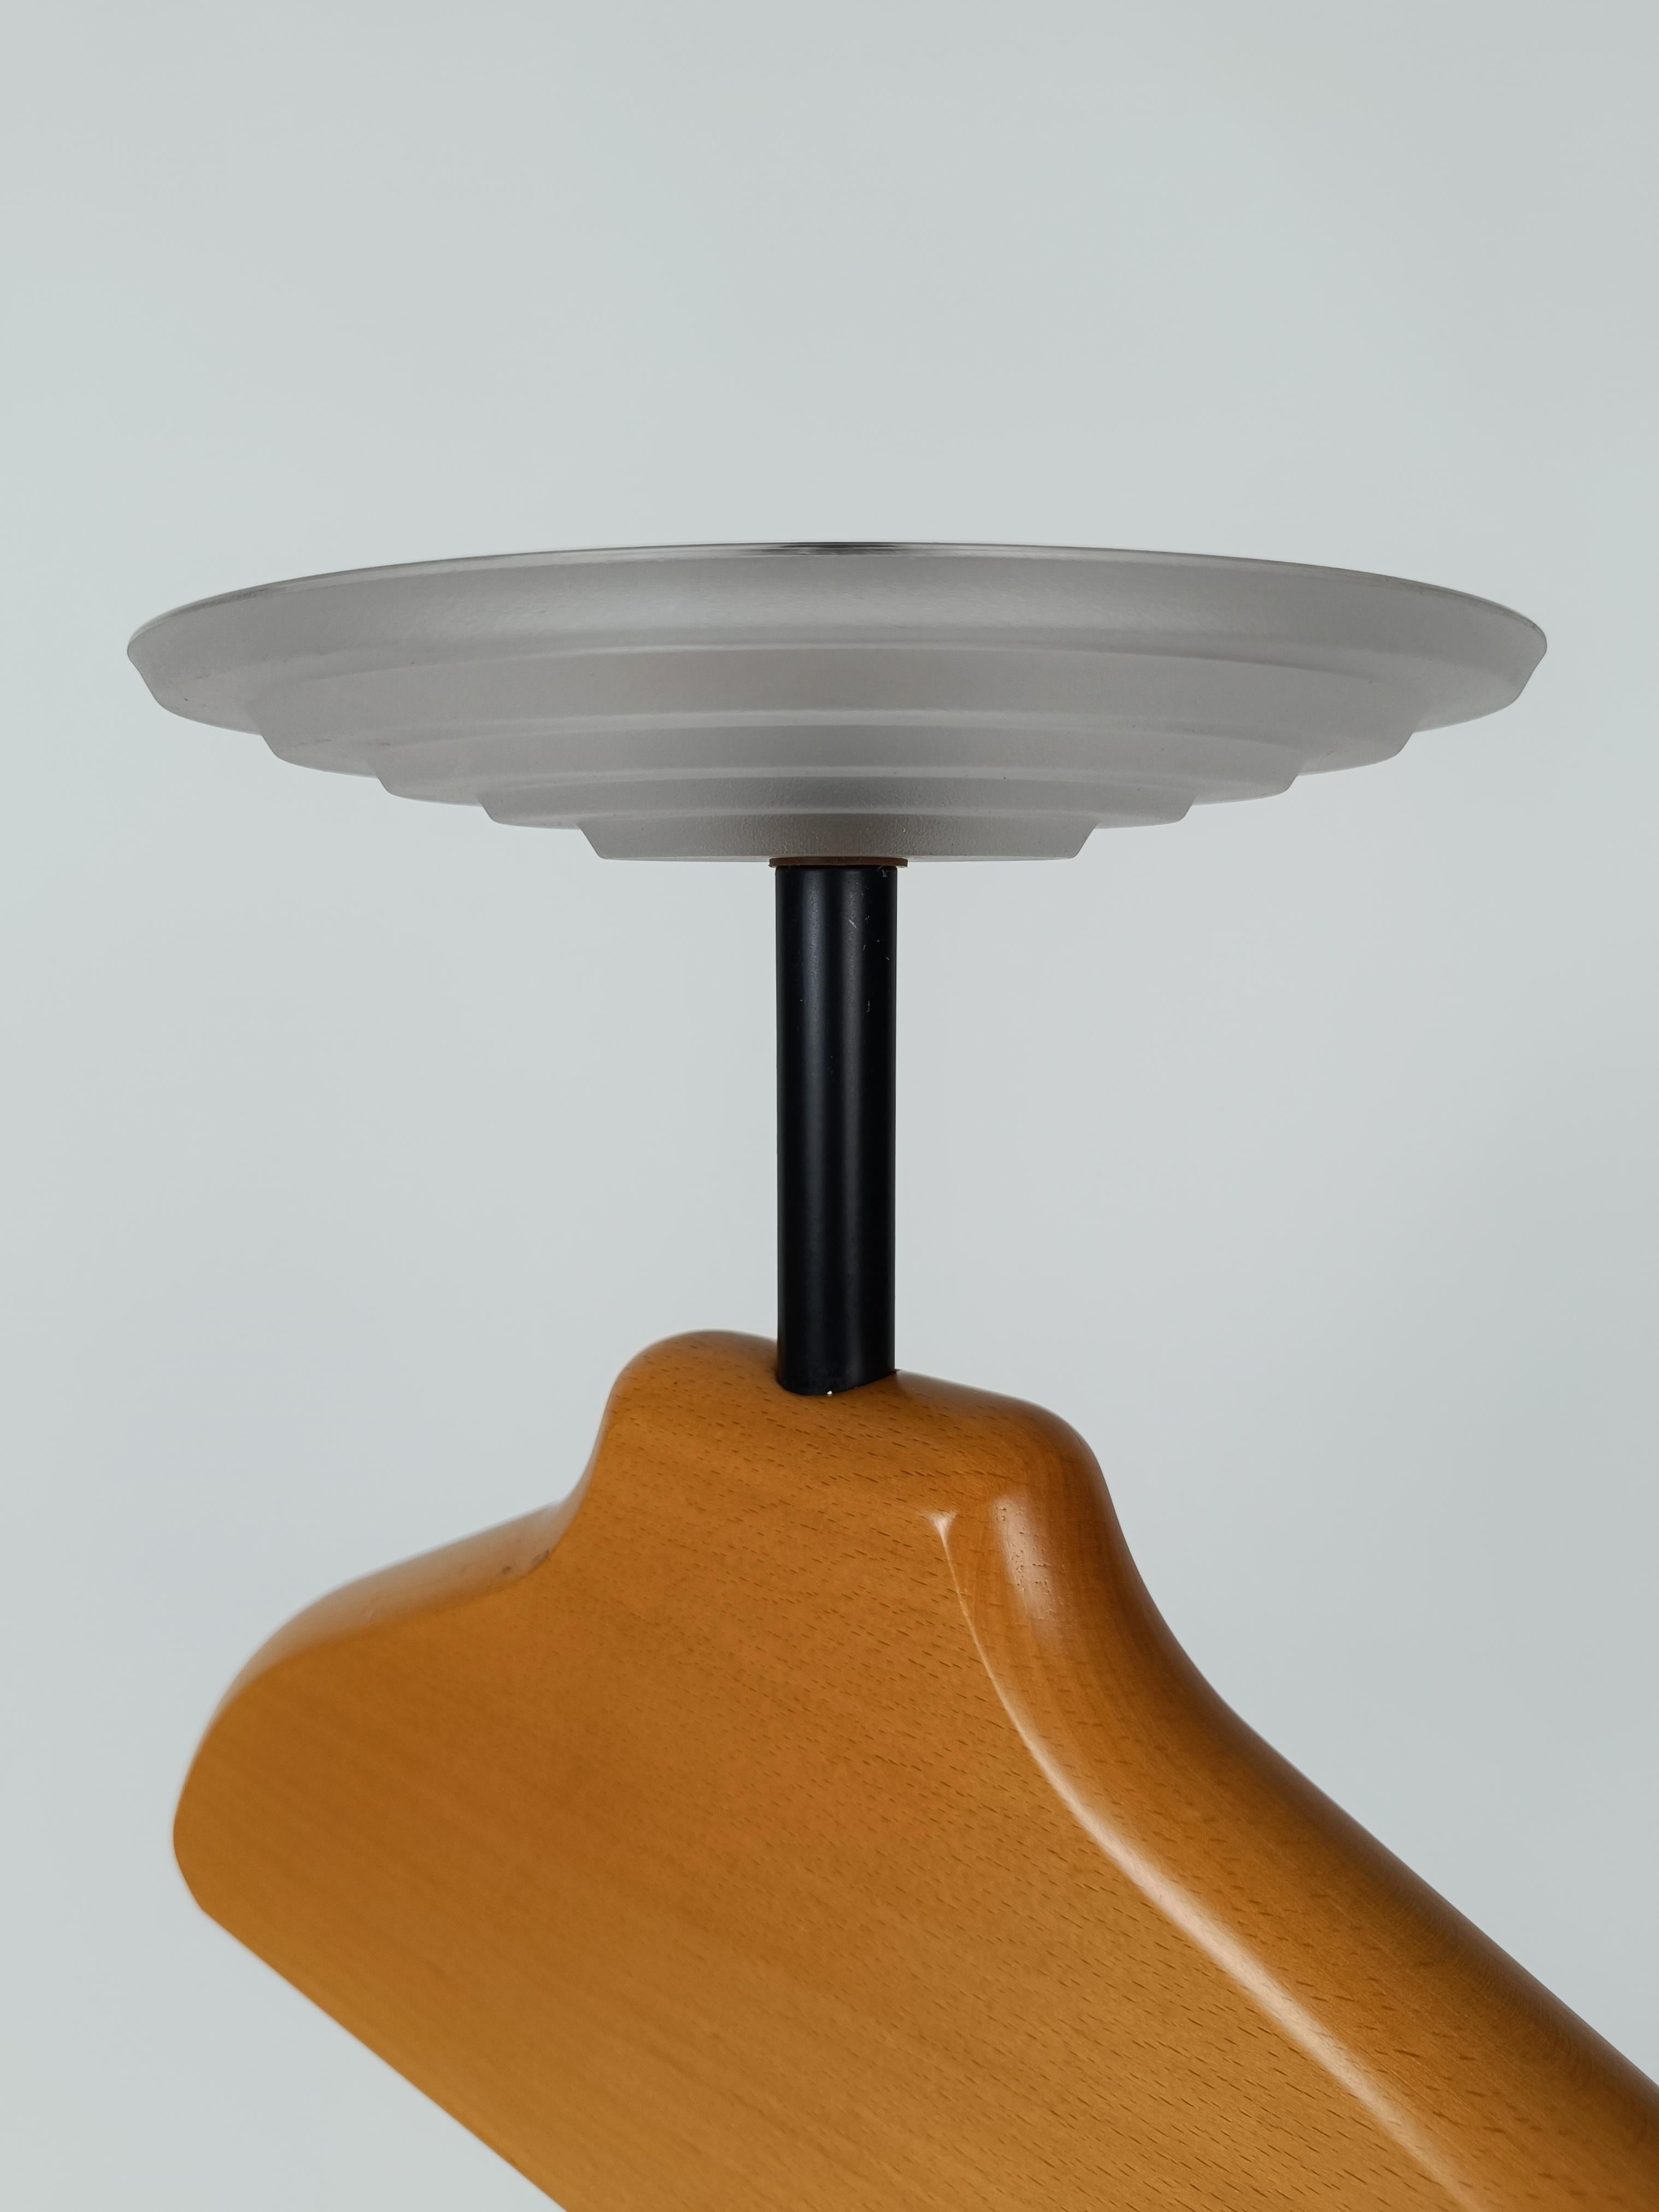 Italian Post Modern Valet Stand by Fontana Arte Made in Glass, Metal and Beech 1